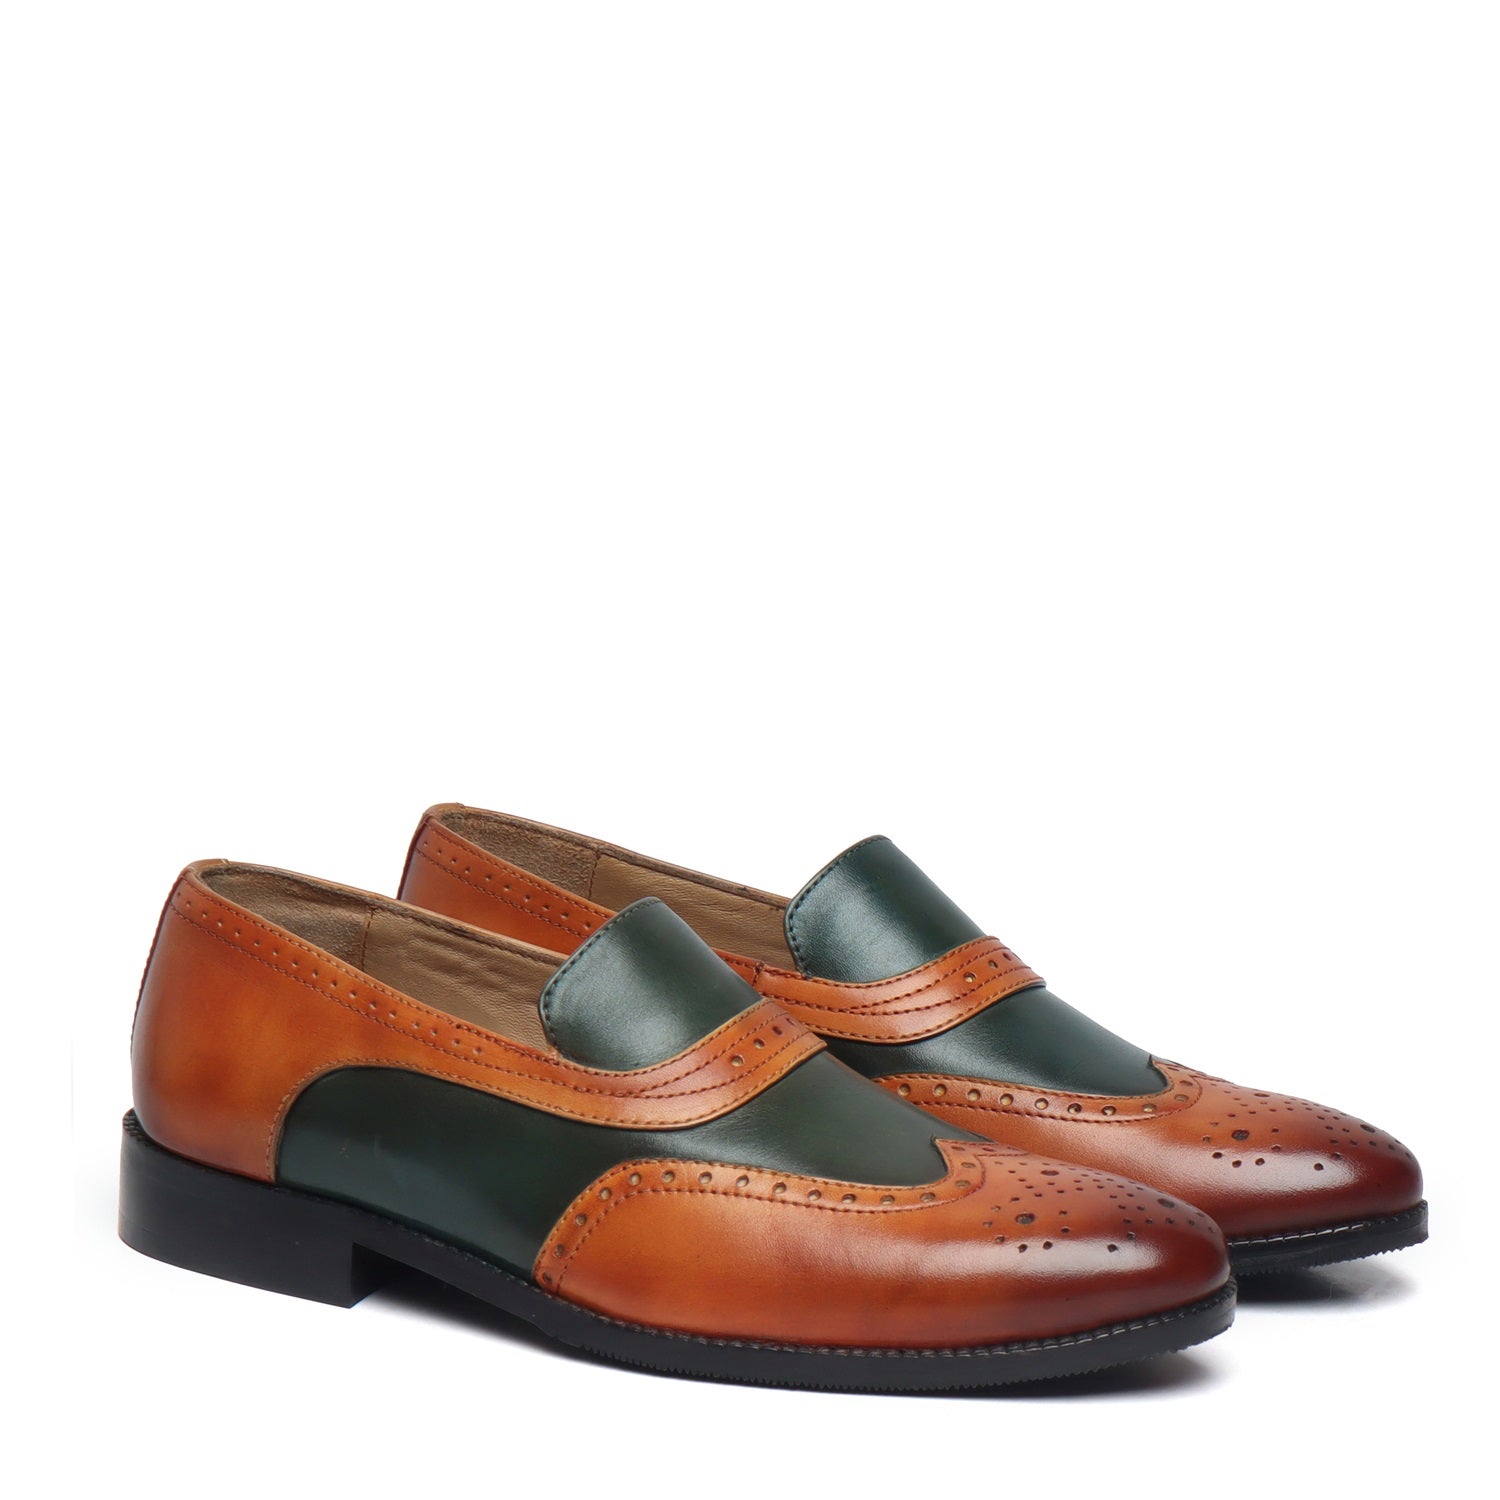 Green-Tan Leather Sassy Slip-On Shoes